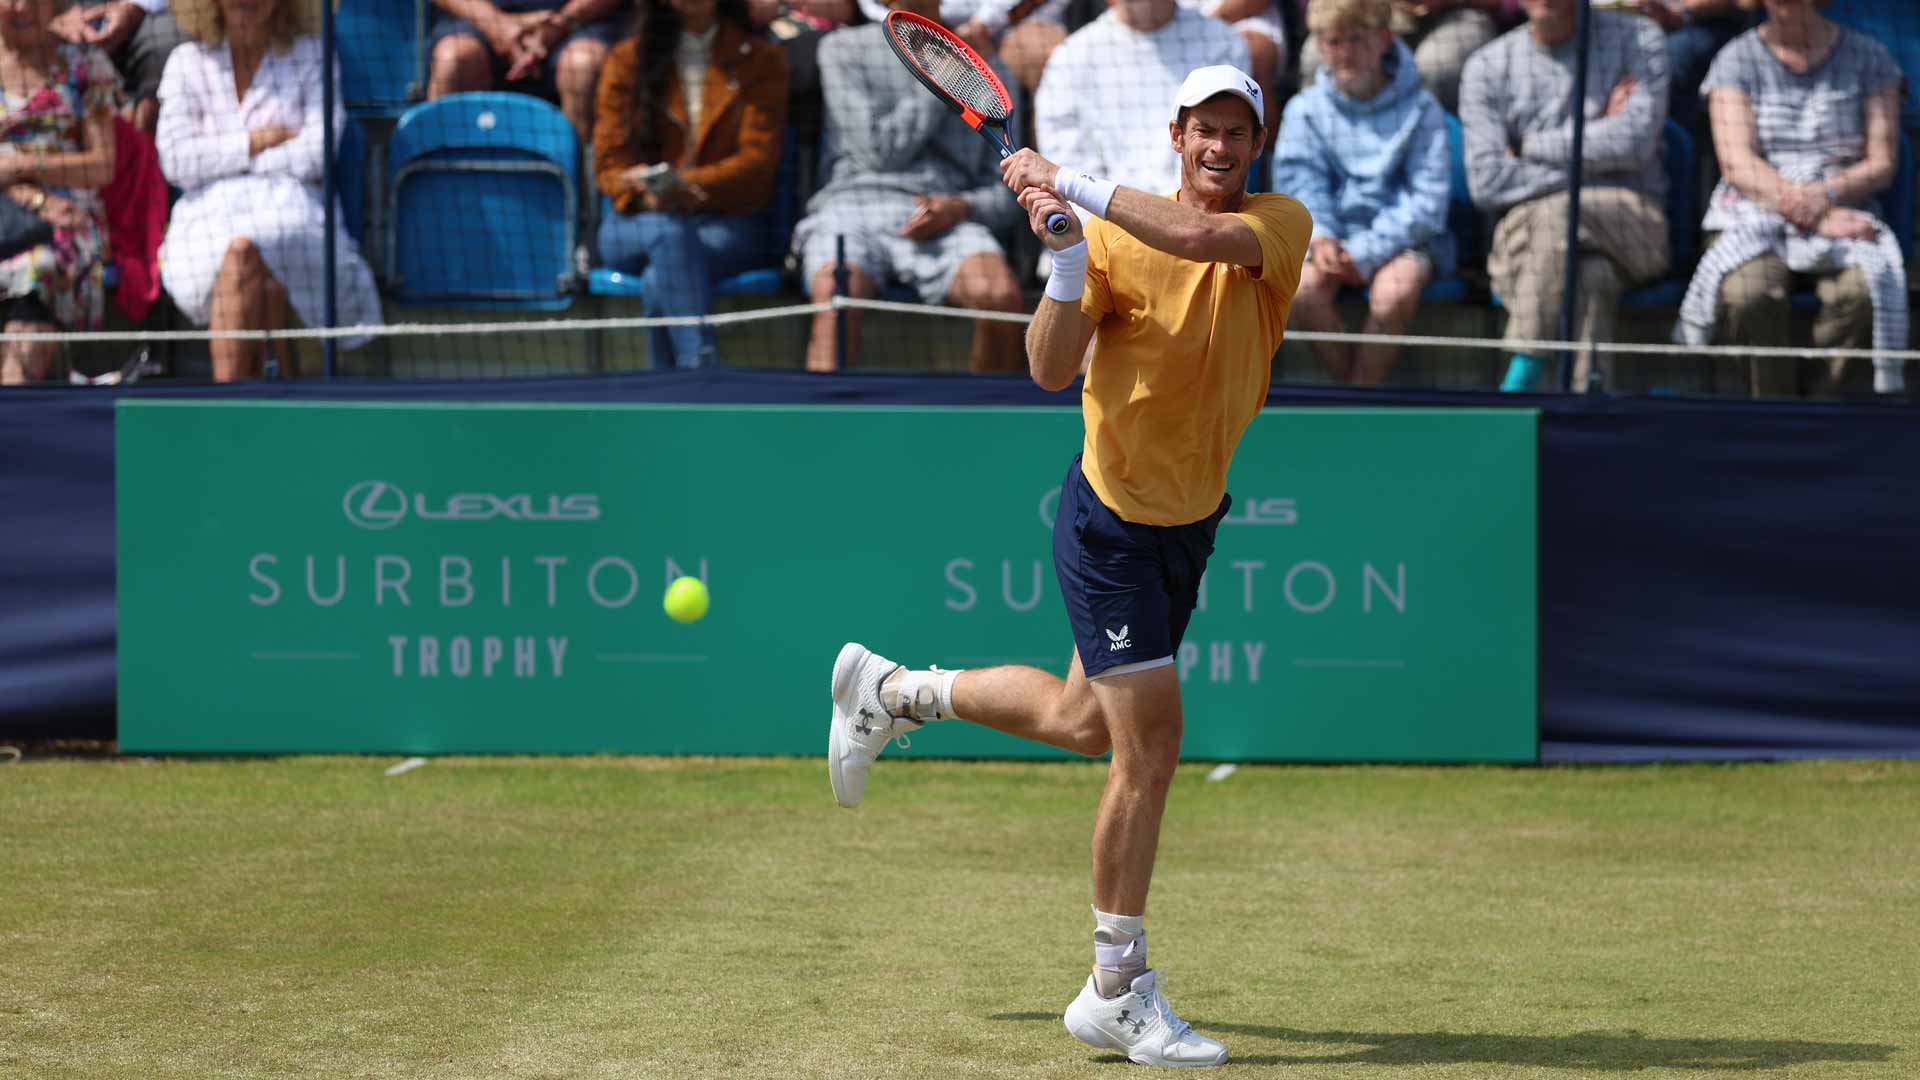 Andy Murray in action at the Lexus Surbiton Trophy.